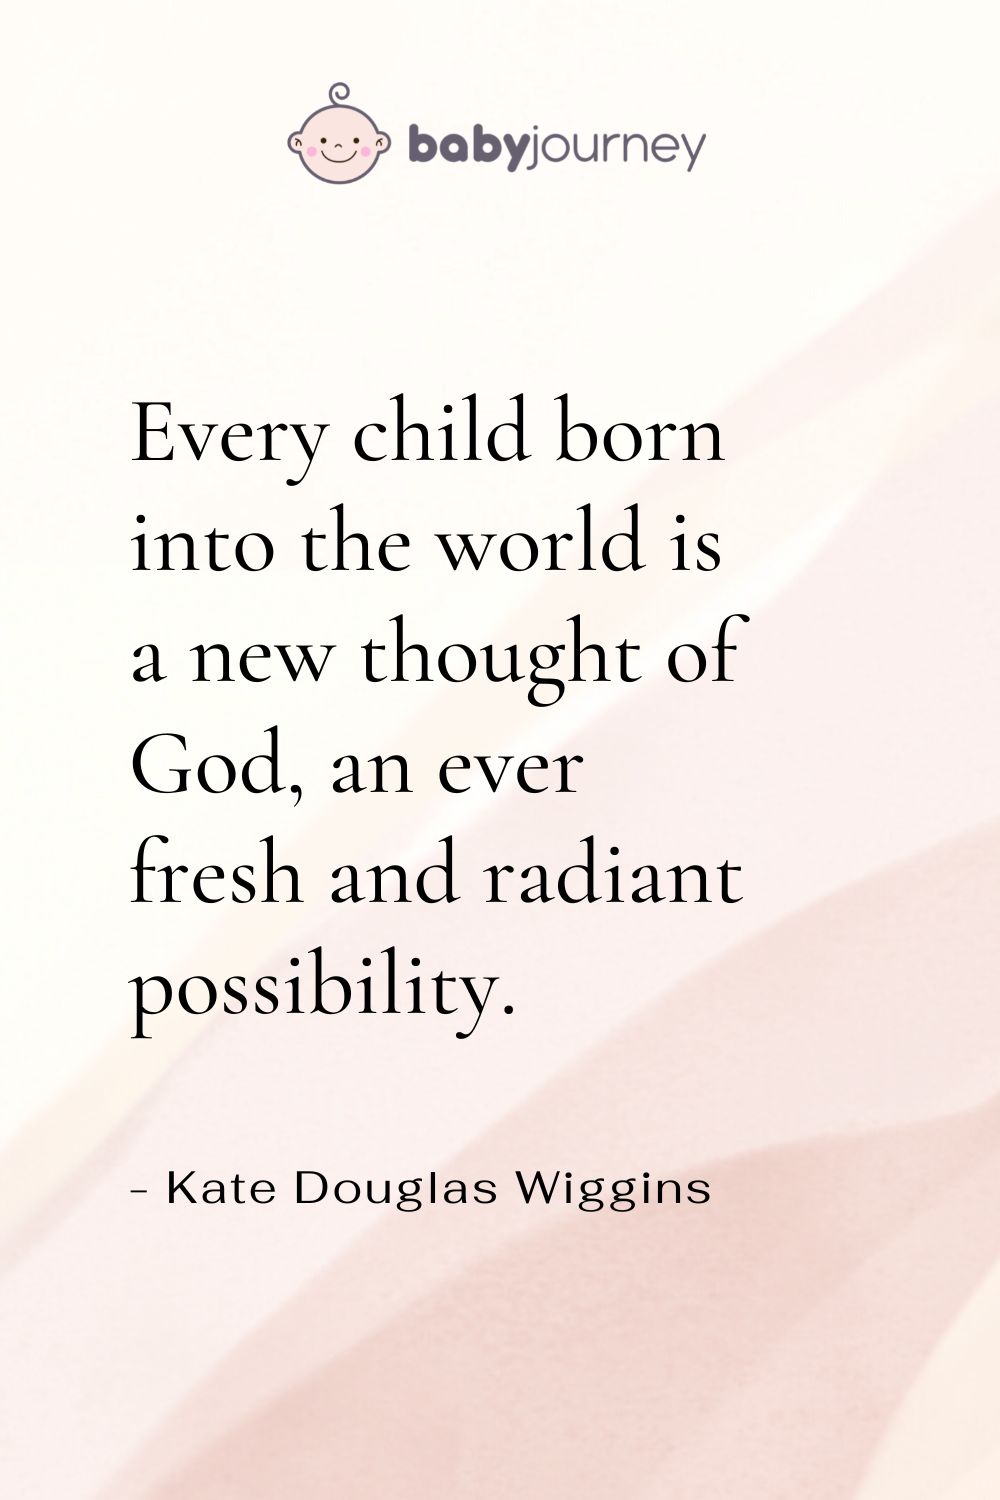 Every child born into the world is a new thought of God, an ever fresh and radiant possibility. - Kate Douglas Wiggins - Baptism quotes - Baby Journey